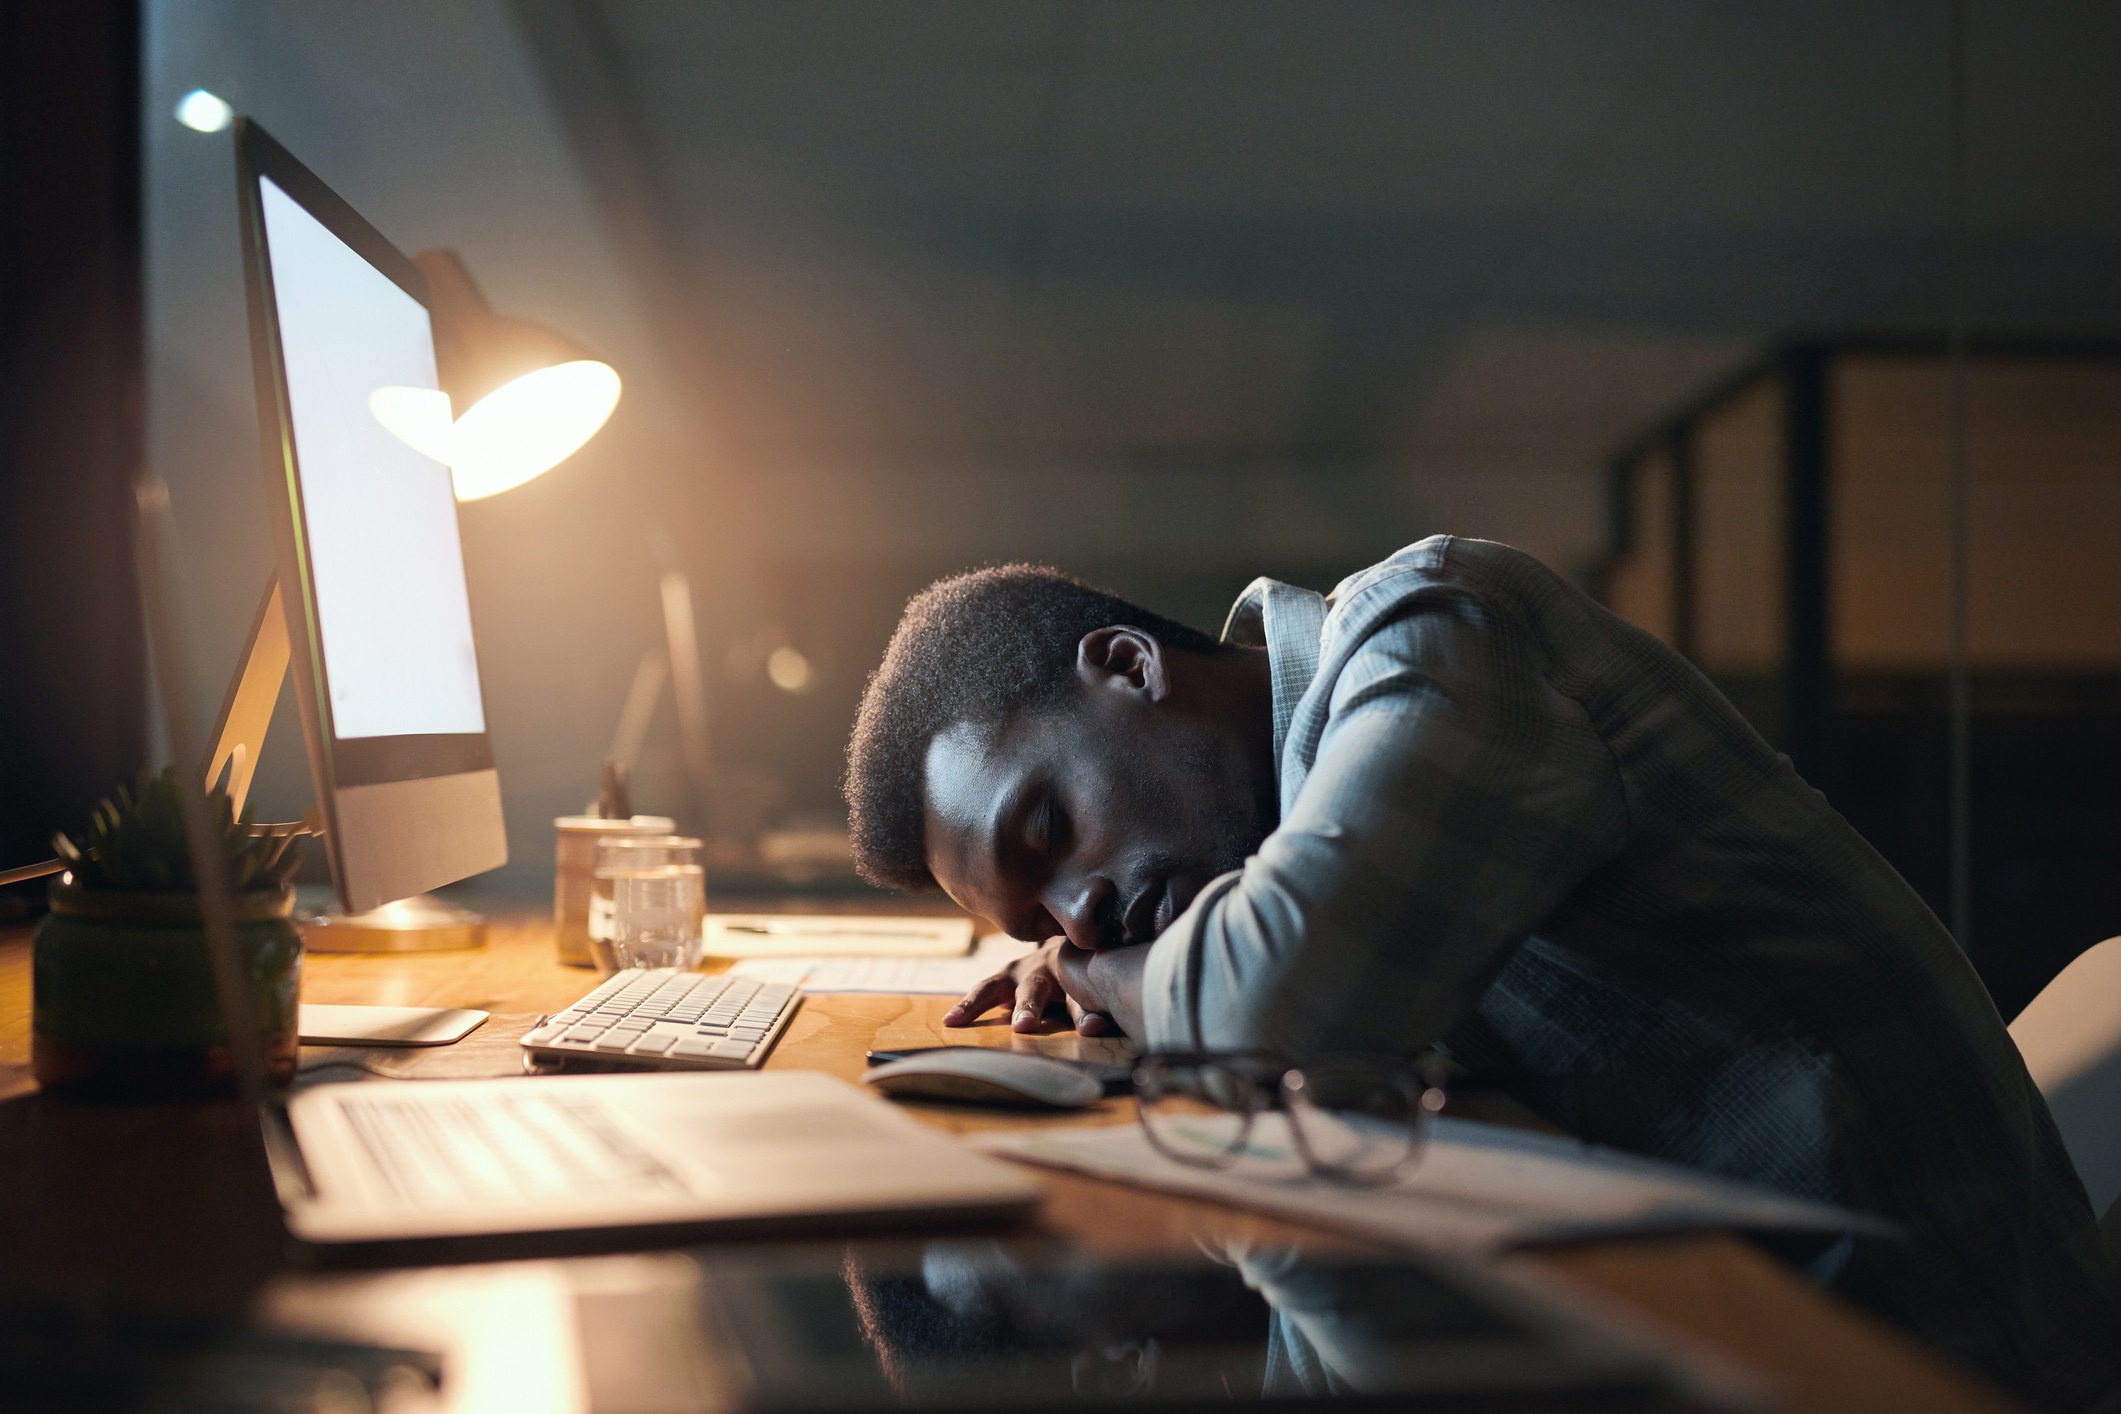 Tired Black man, sleeping and burnout from working at night by office desk suffering stress or overworked. Exhausted African American male asleep on table by computer for long work hours at workplace